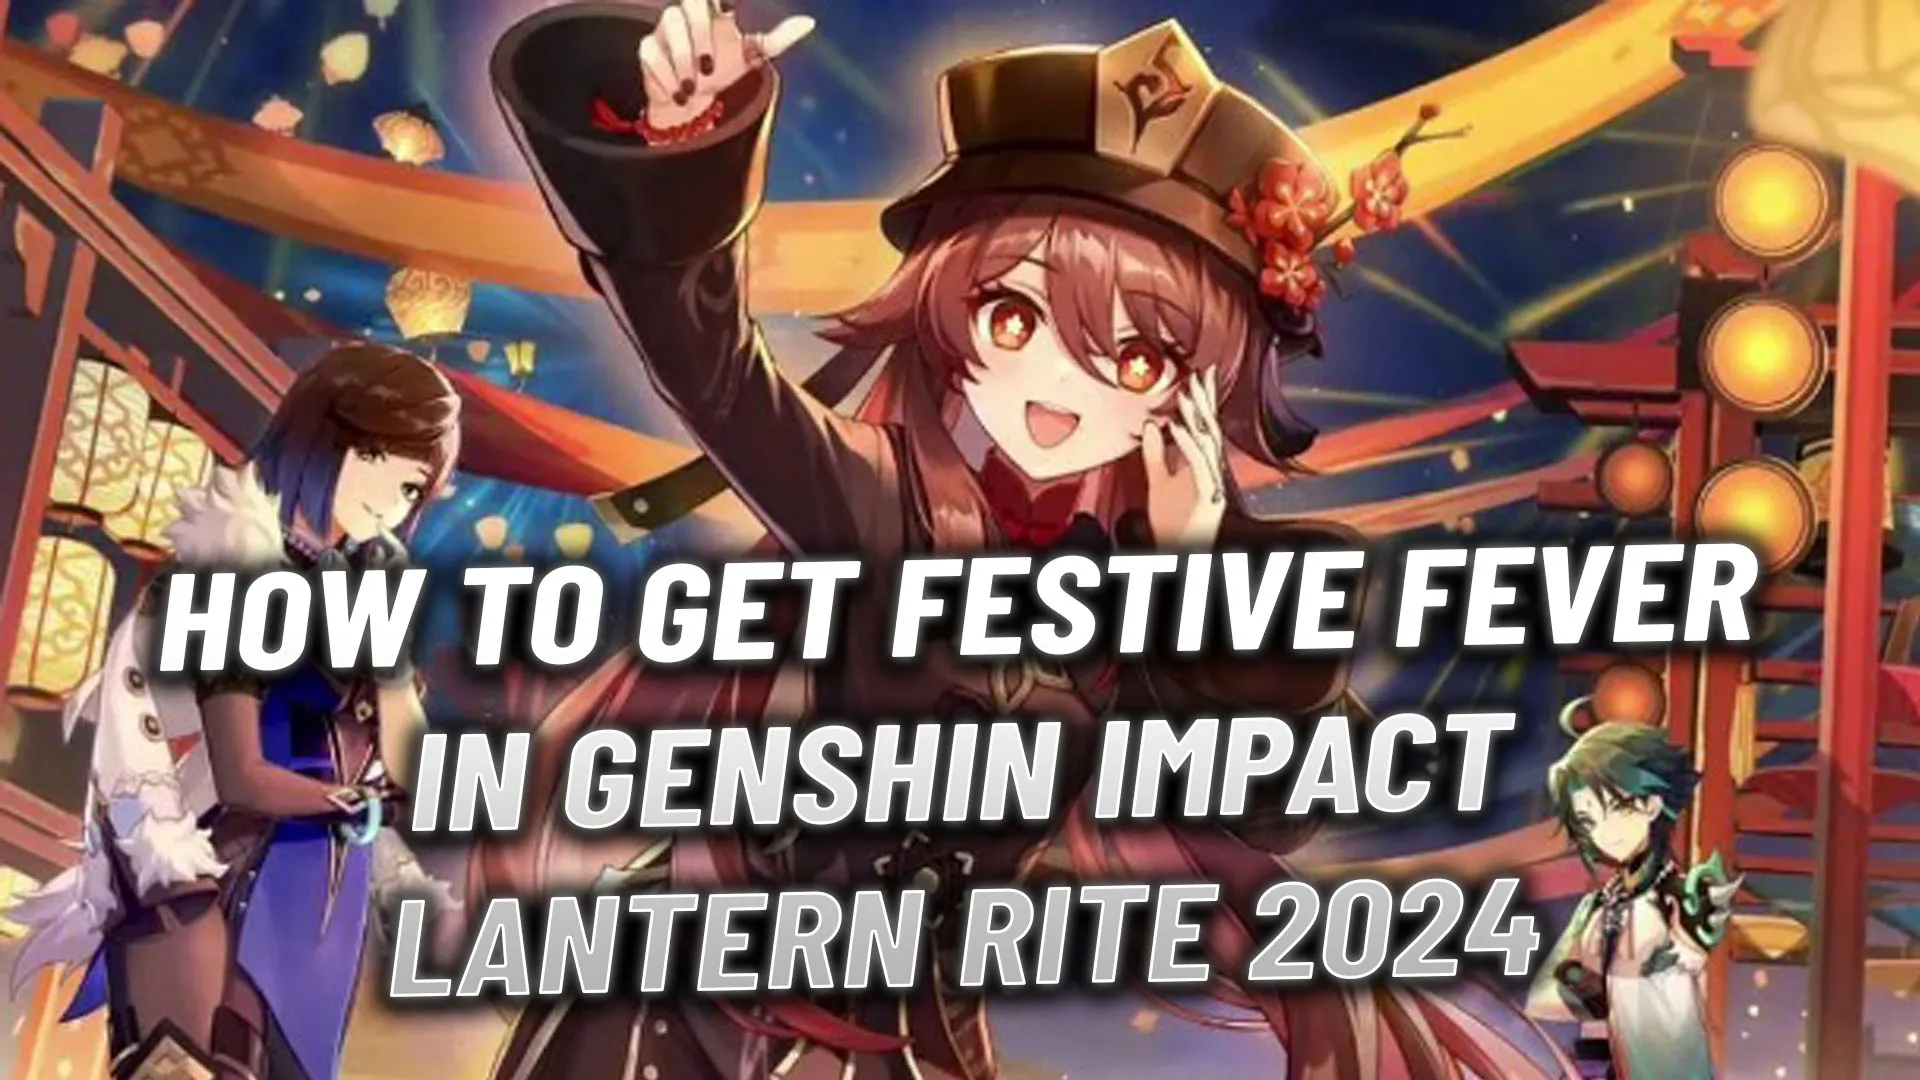 Genshin Impact: How To Get A 4-Star Liyue Character With Festive Fever